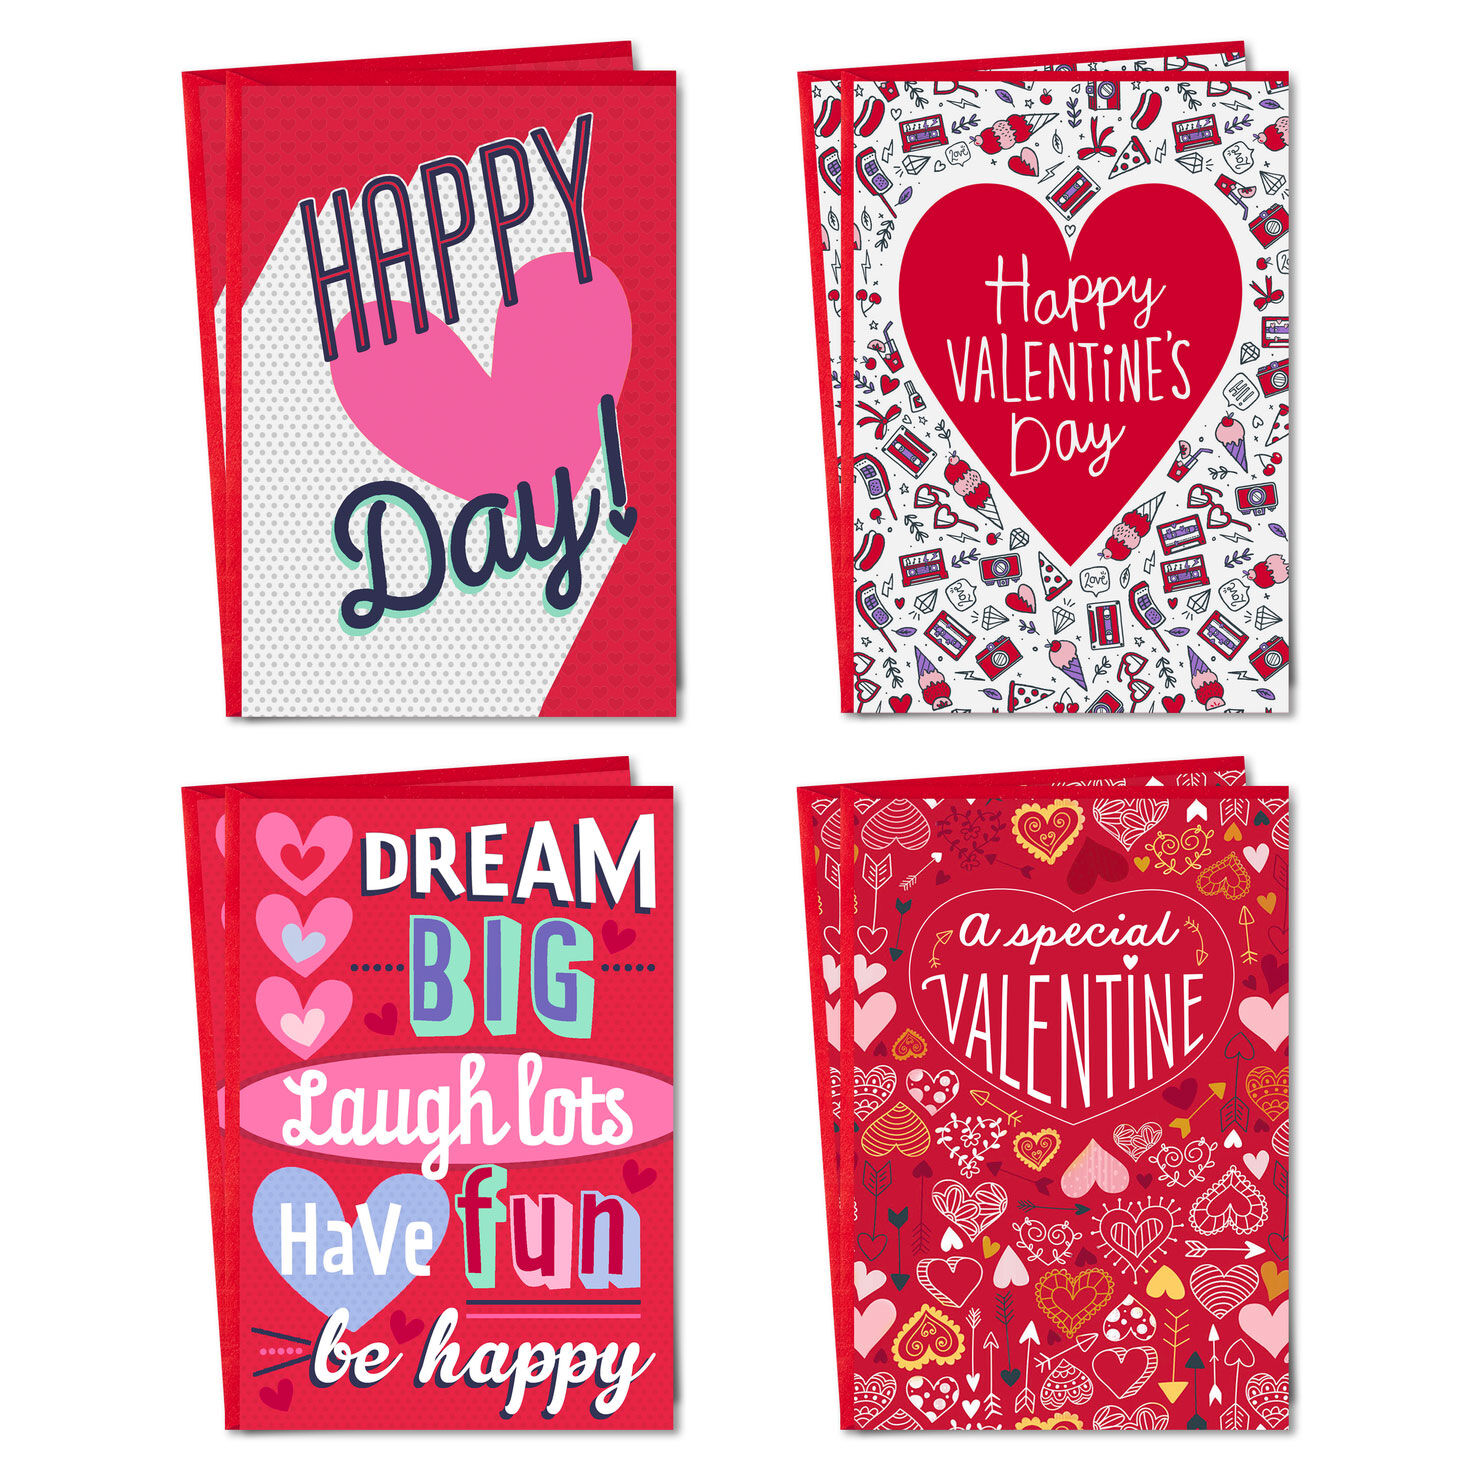 Cute Valentine's Day Gifts for Kids - Organize by Dreams